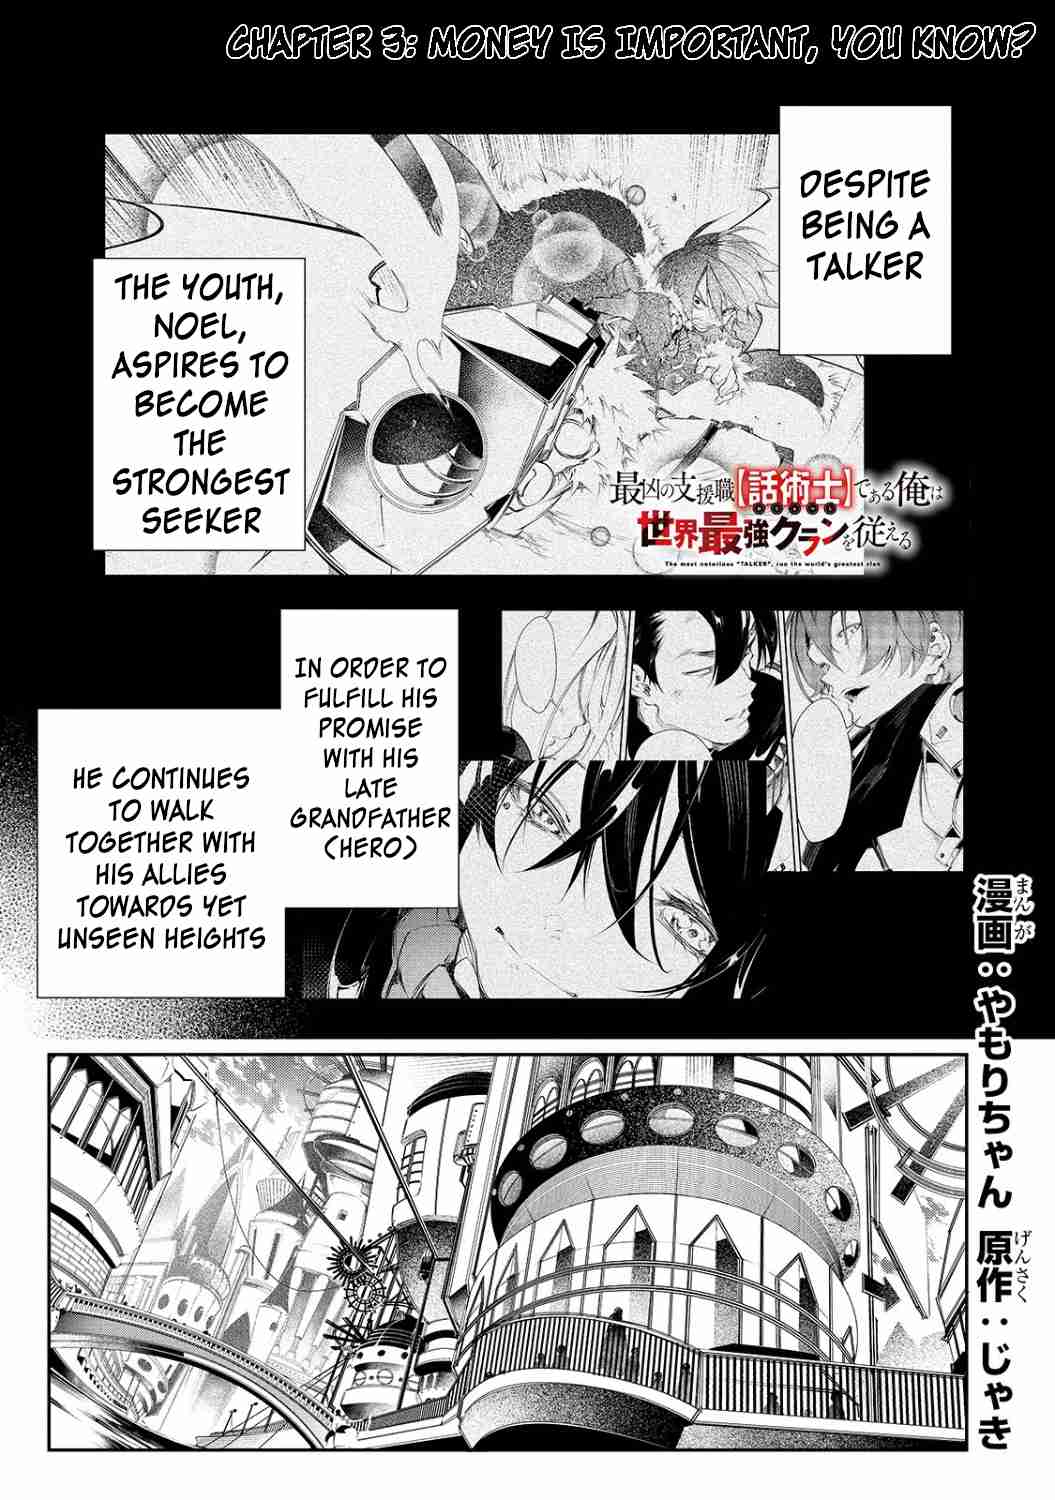 The Most Notorious "Talker" Runs the World's Greatest Clan Vol. 1 Ch. 3 Money Is Important, You Know?